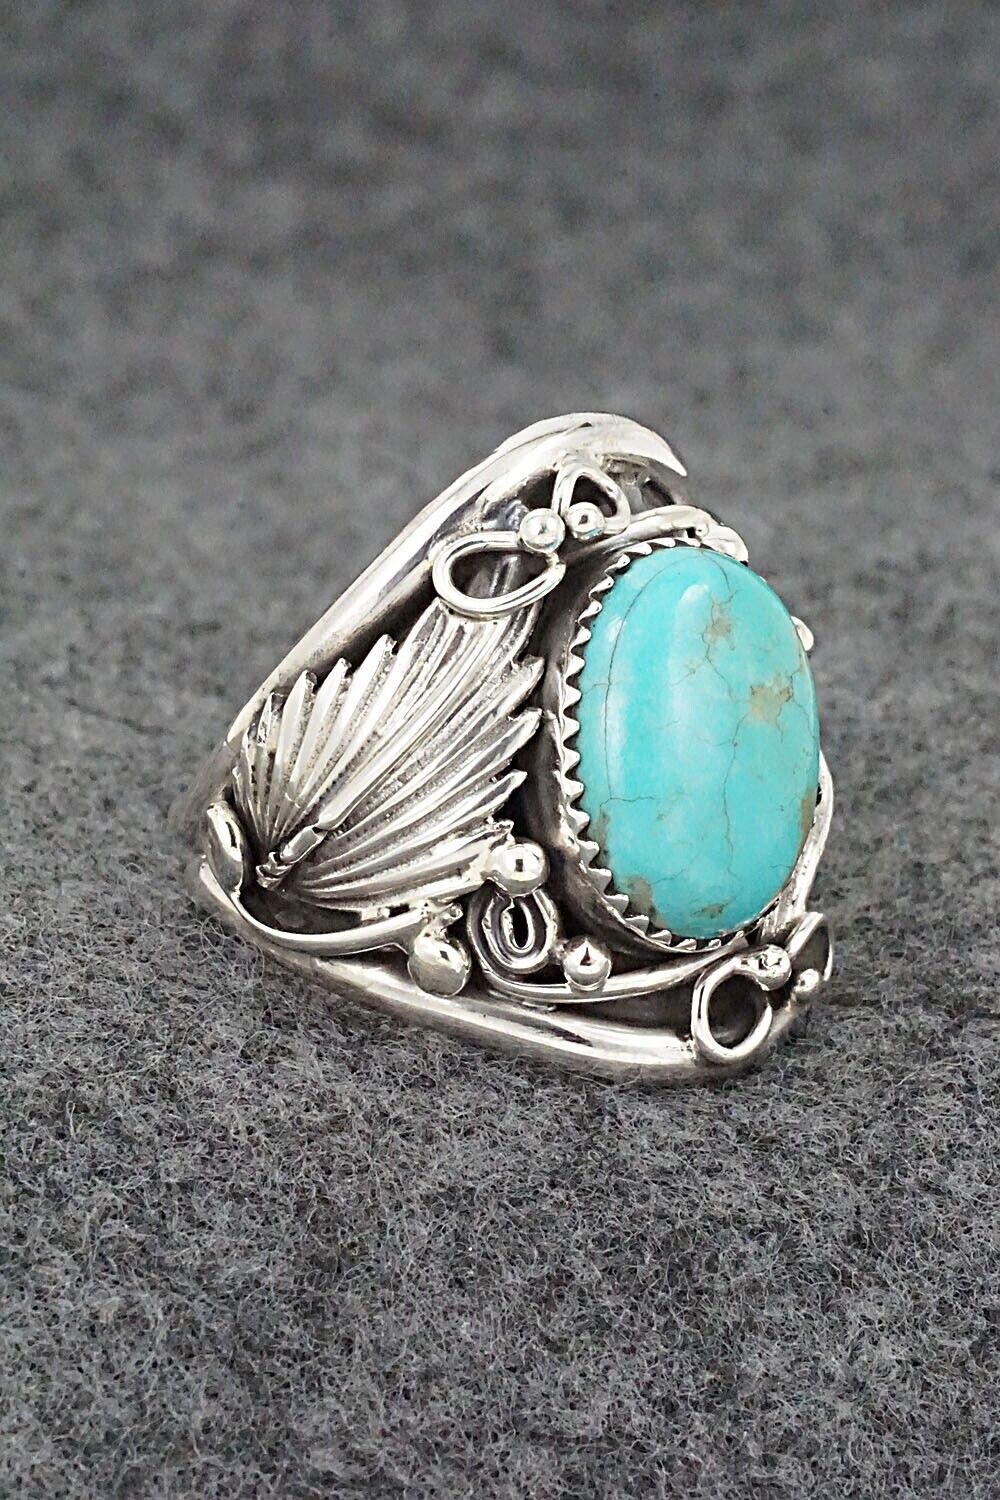 Turquoise & Sterling Silver Ring - Jeannette Saunders - Size 11.5